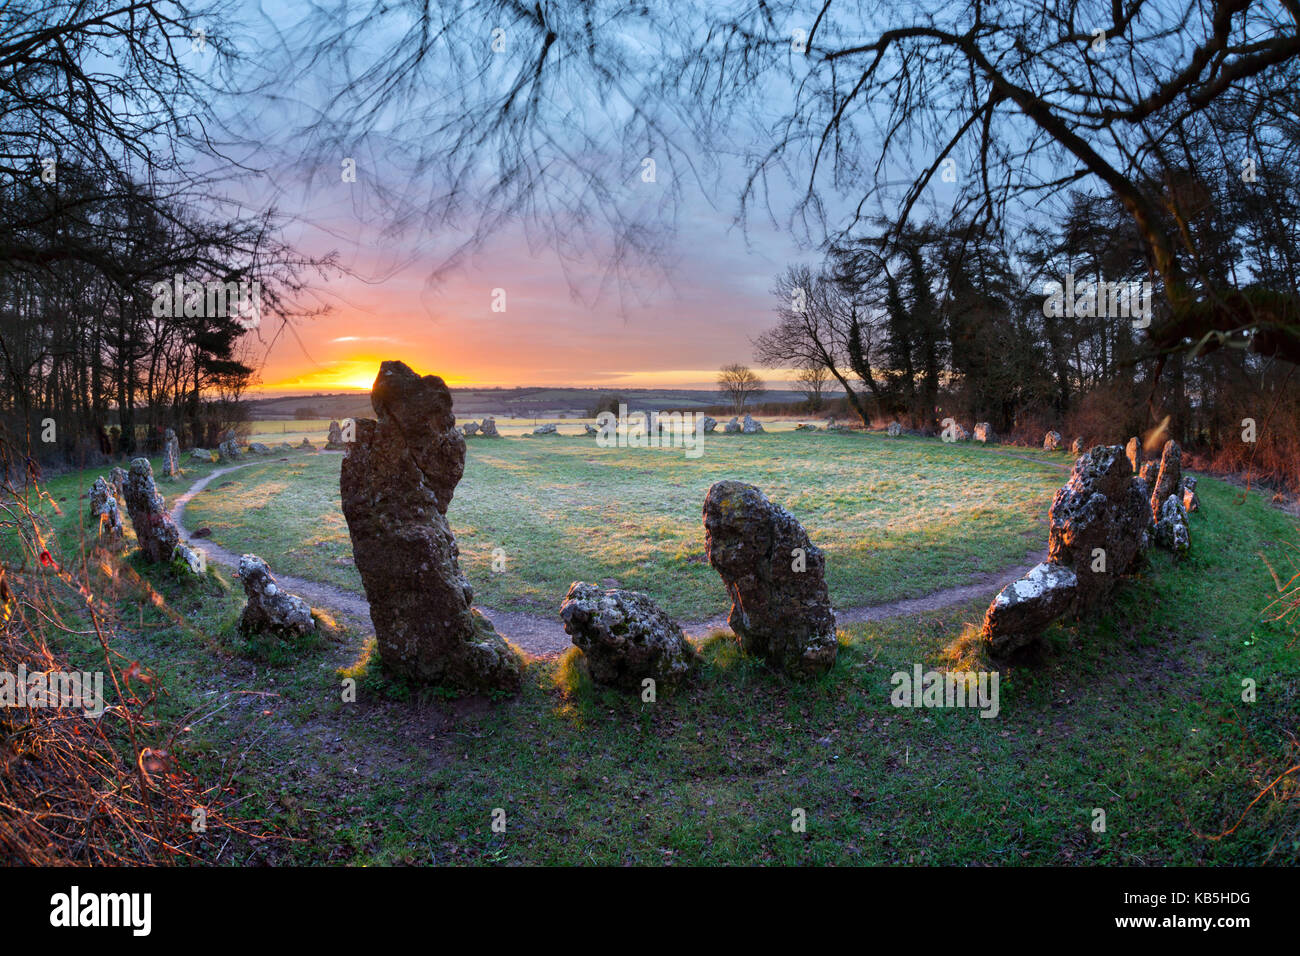 The King's Men stone circle at sunrise, The Rollright Stones, Chipping Norton, Cotswolds, Oxfordshire, England, United Kingdom Stock Photo